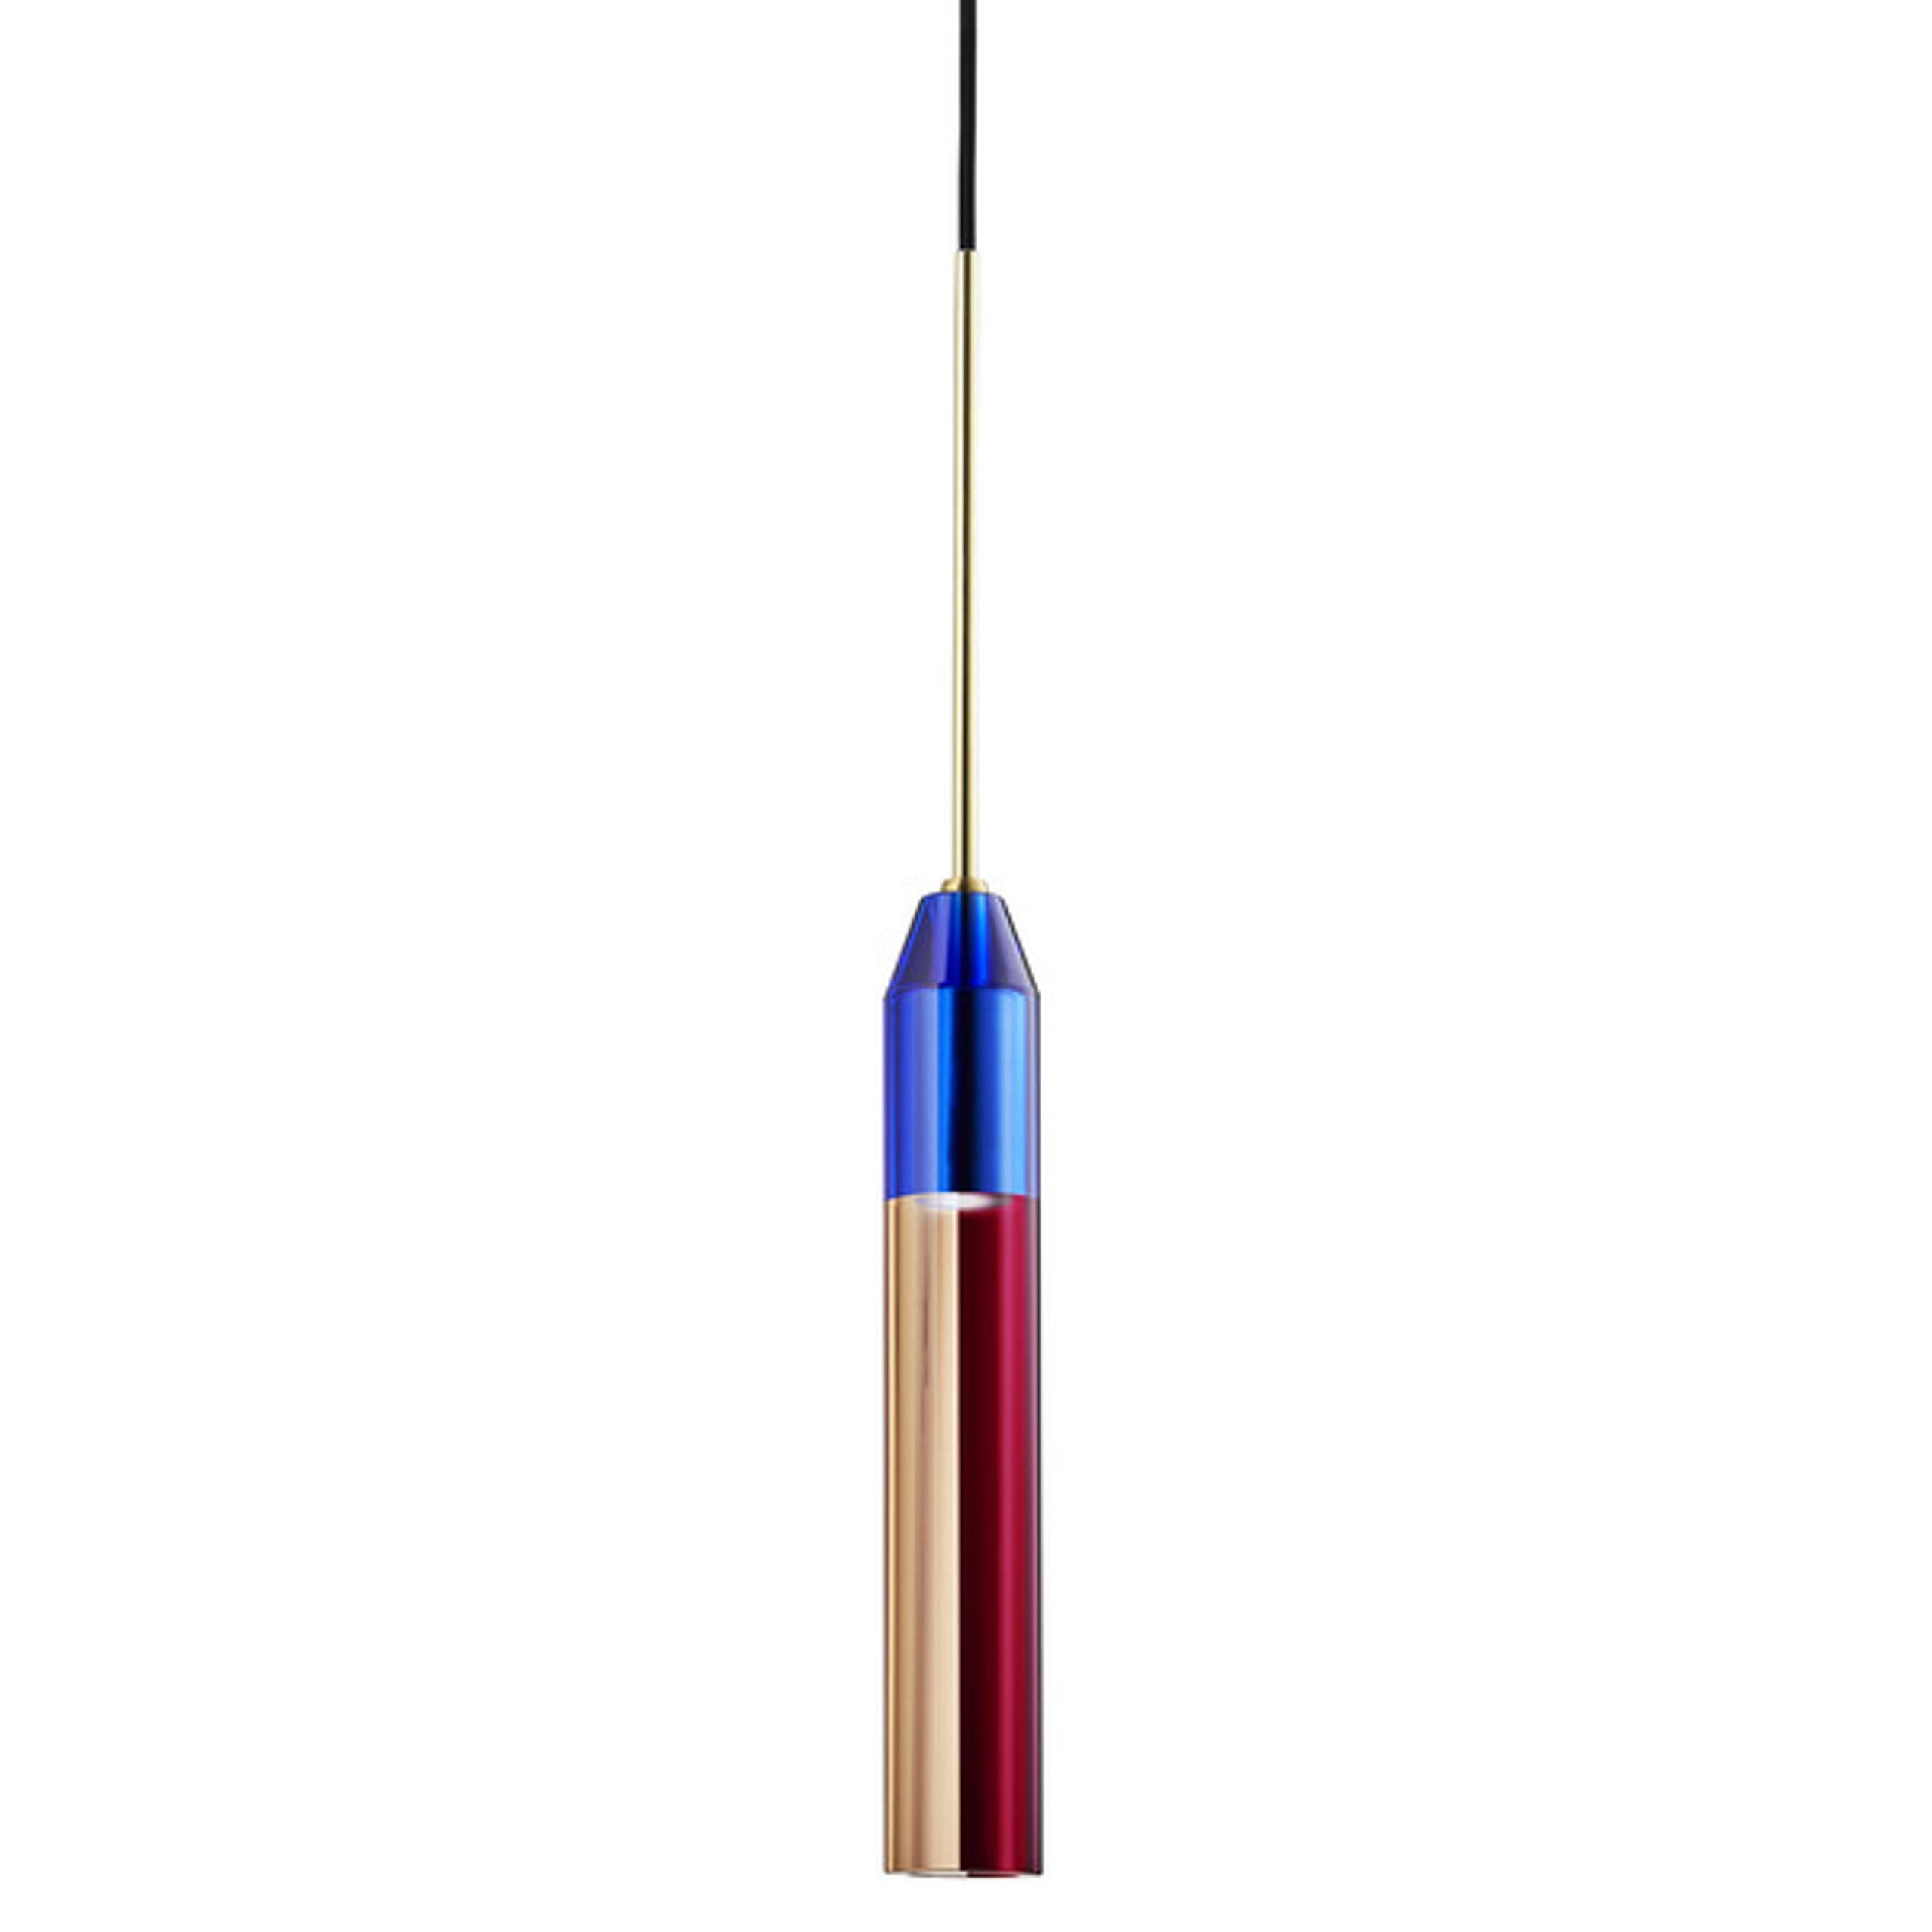 Design By Us - Hängelampe - Carnival Pendant Lamp - No. 1 - Cobalt/Red/Clear/Rouge